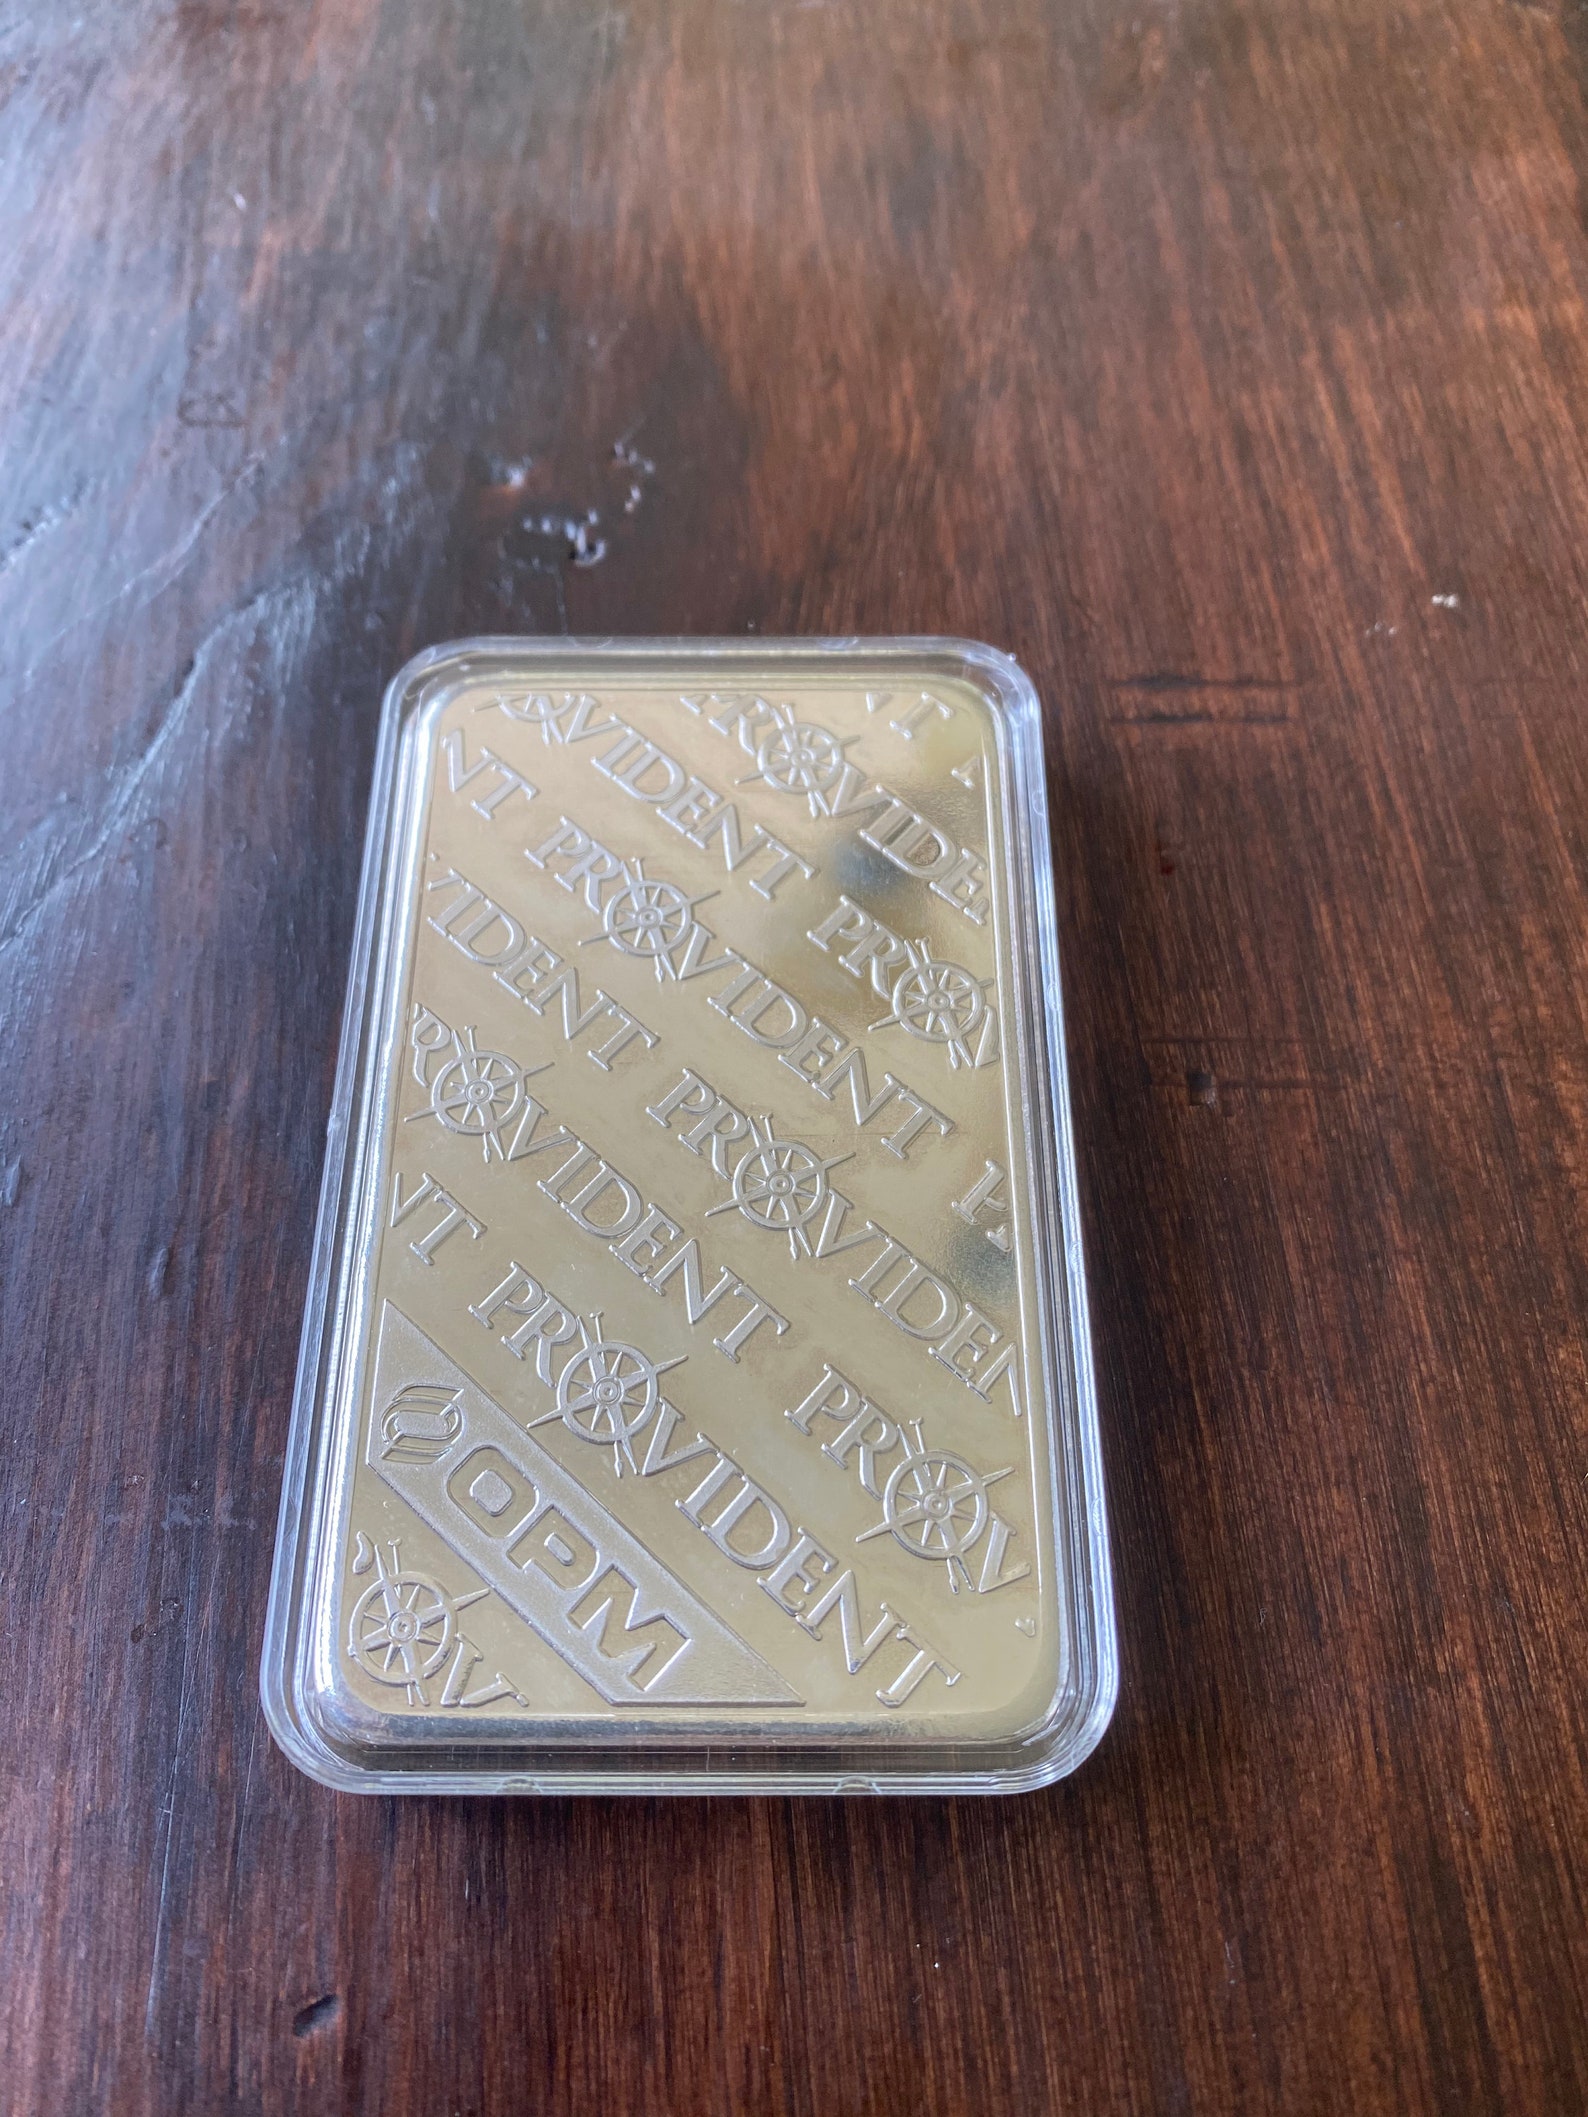 10 Troy Ounce Silver Bar Provident Metals Enclosed in | Etsy